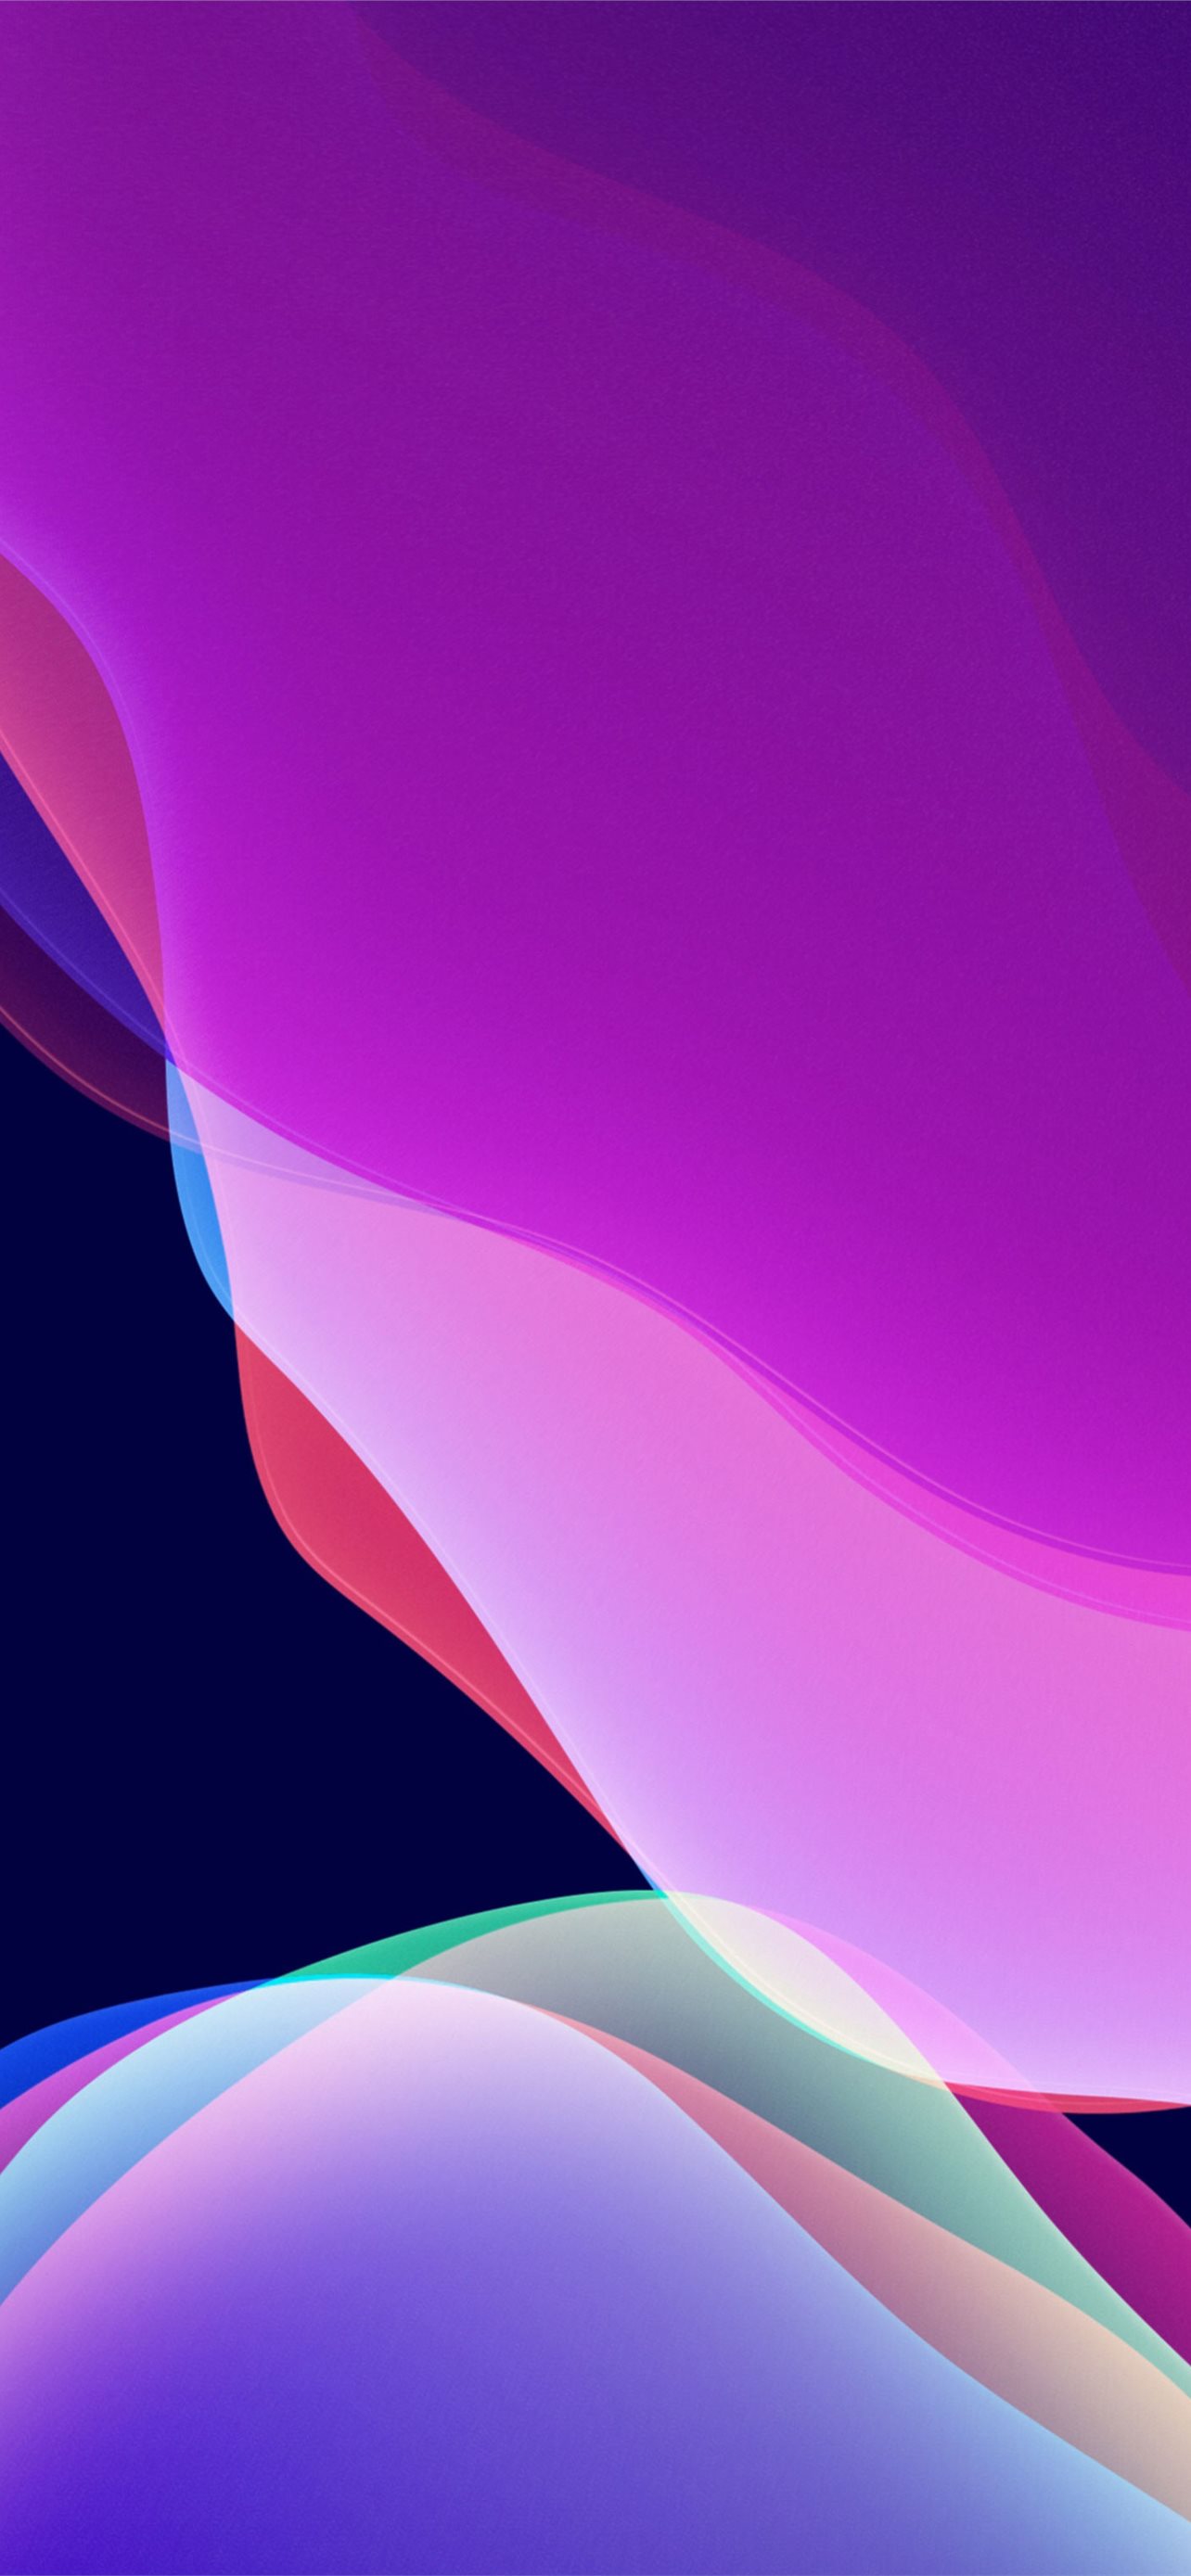 Galaxy Water Live Wallpaper - Apps on Google Play